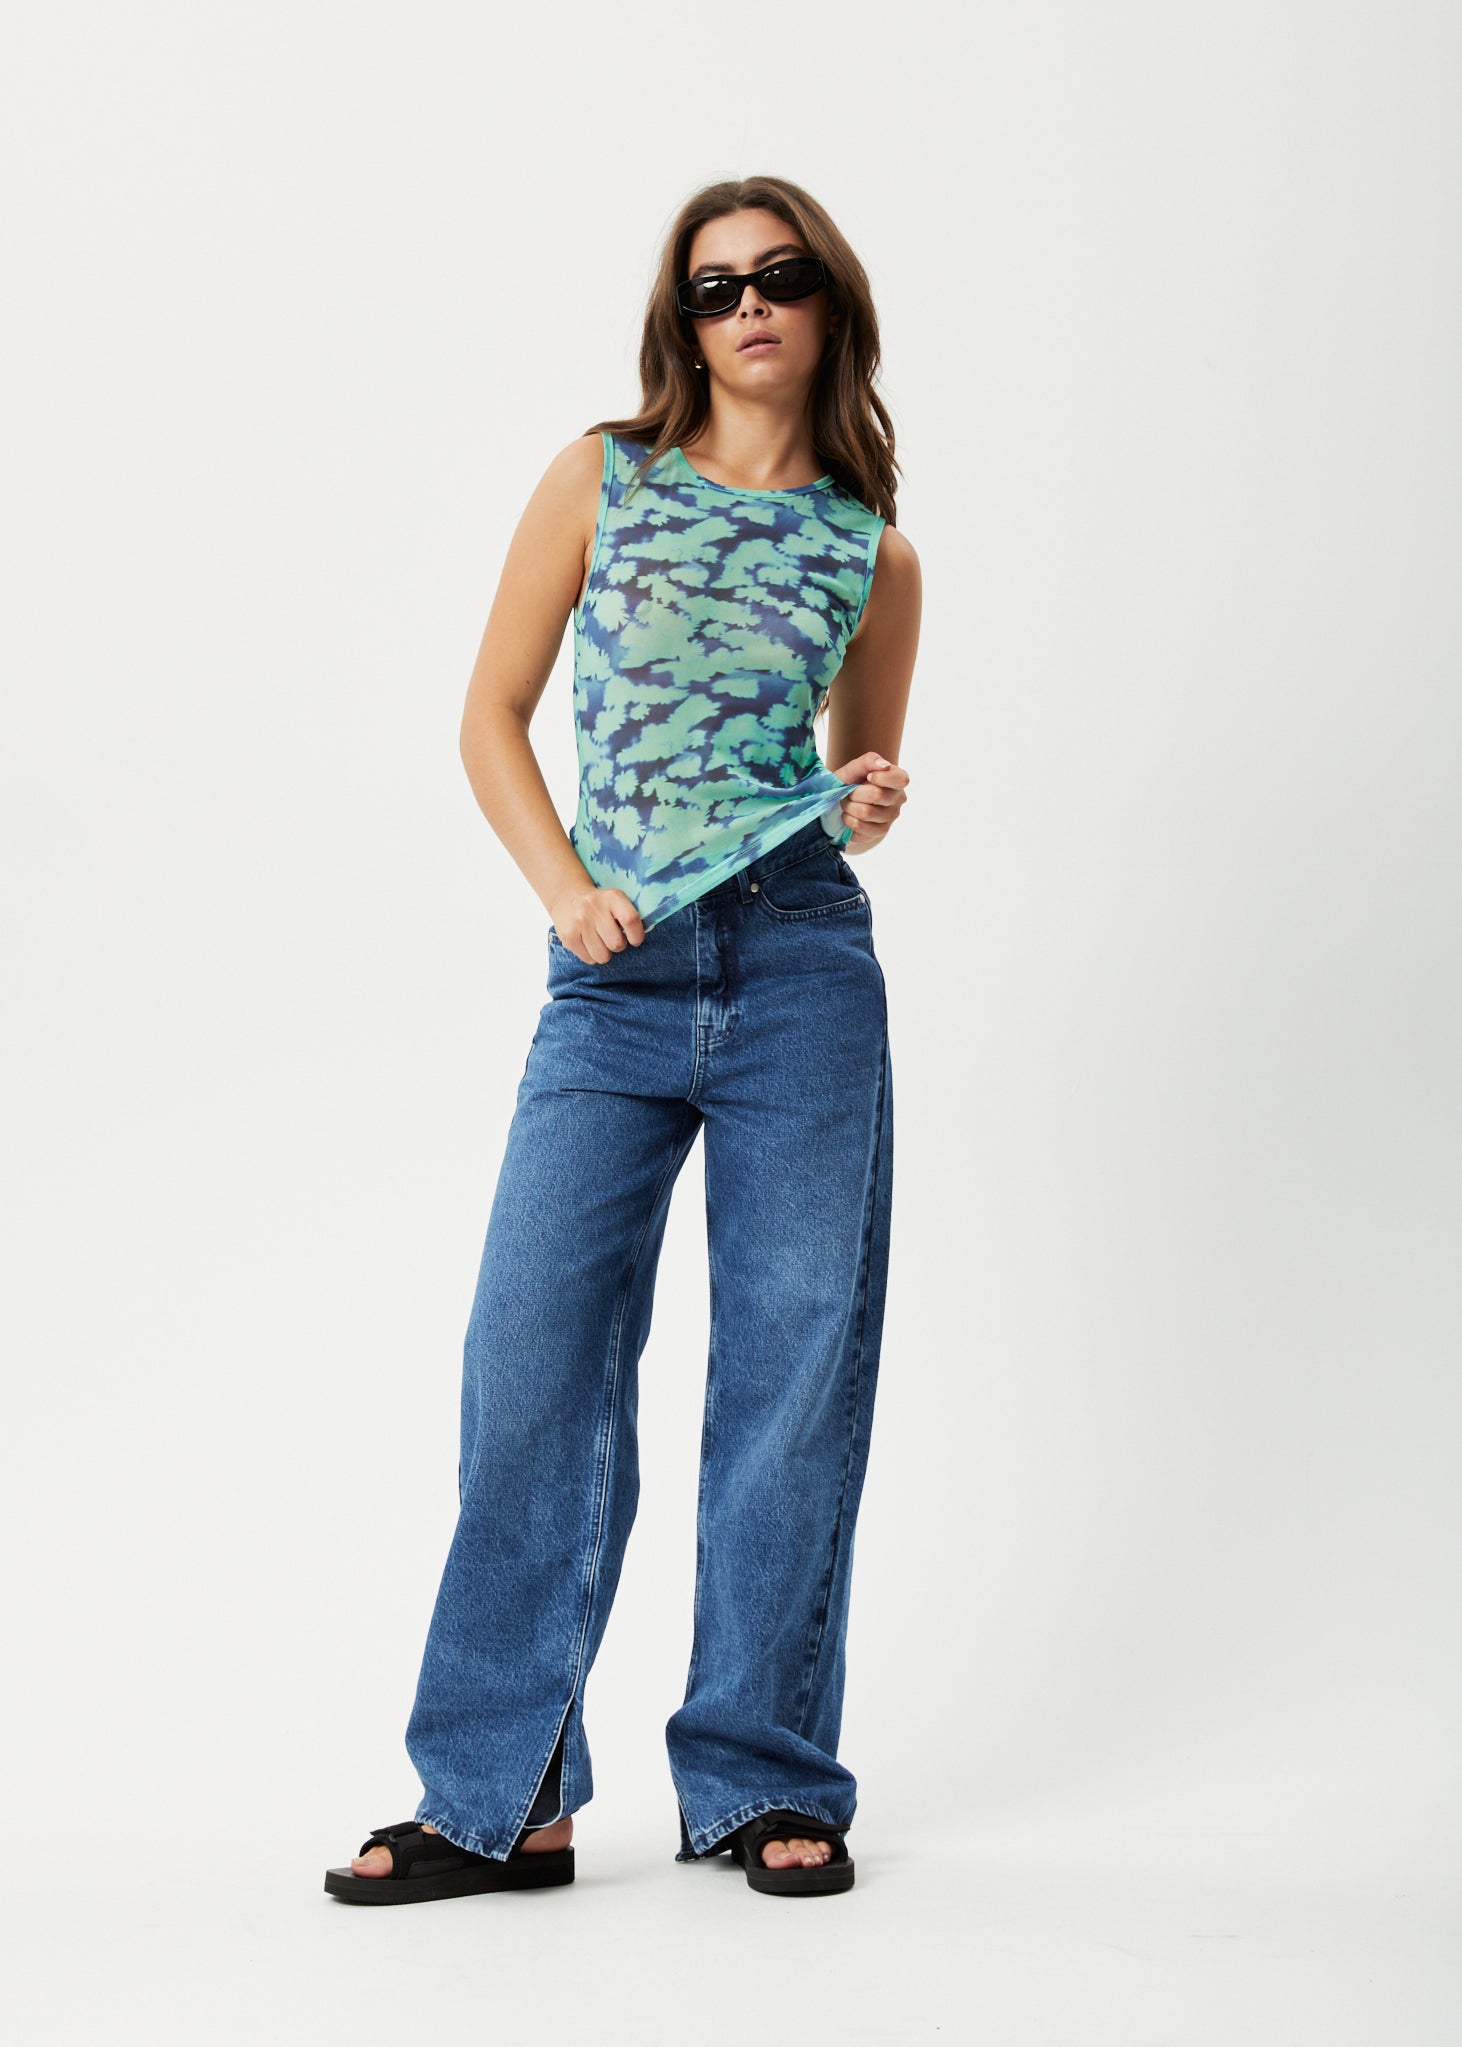 Afends Womens Liquid - Recycled High Waisted Sheer Pants - Jade Floral -  Afends AU.